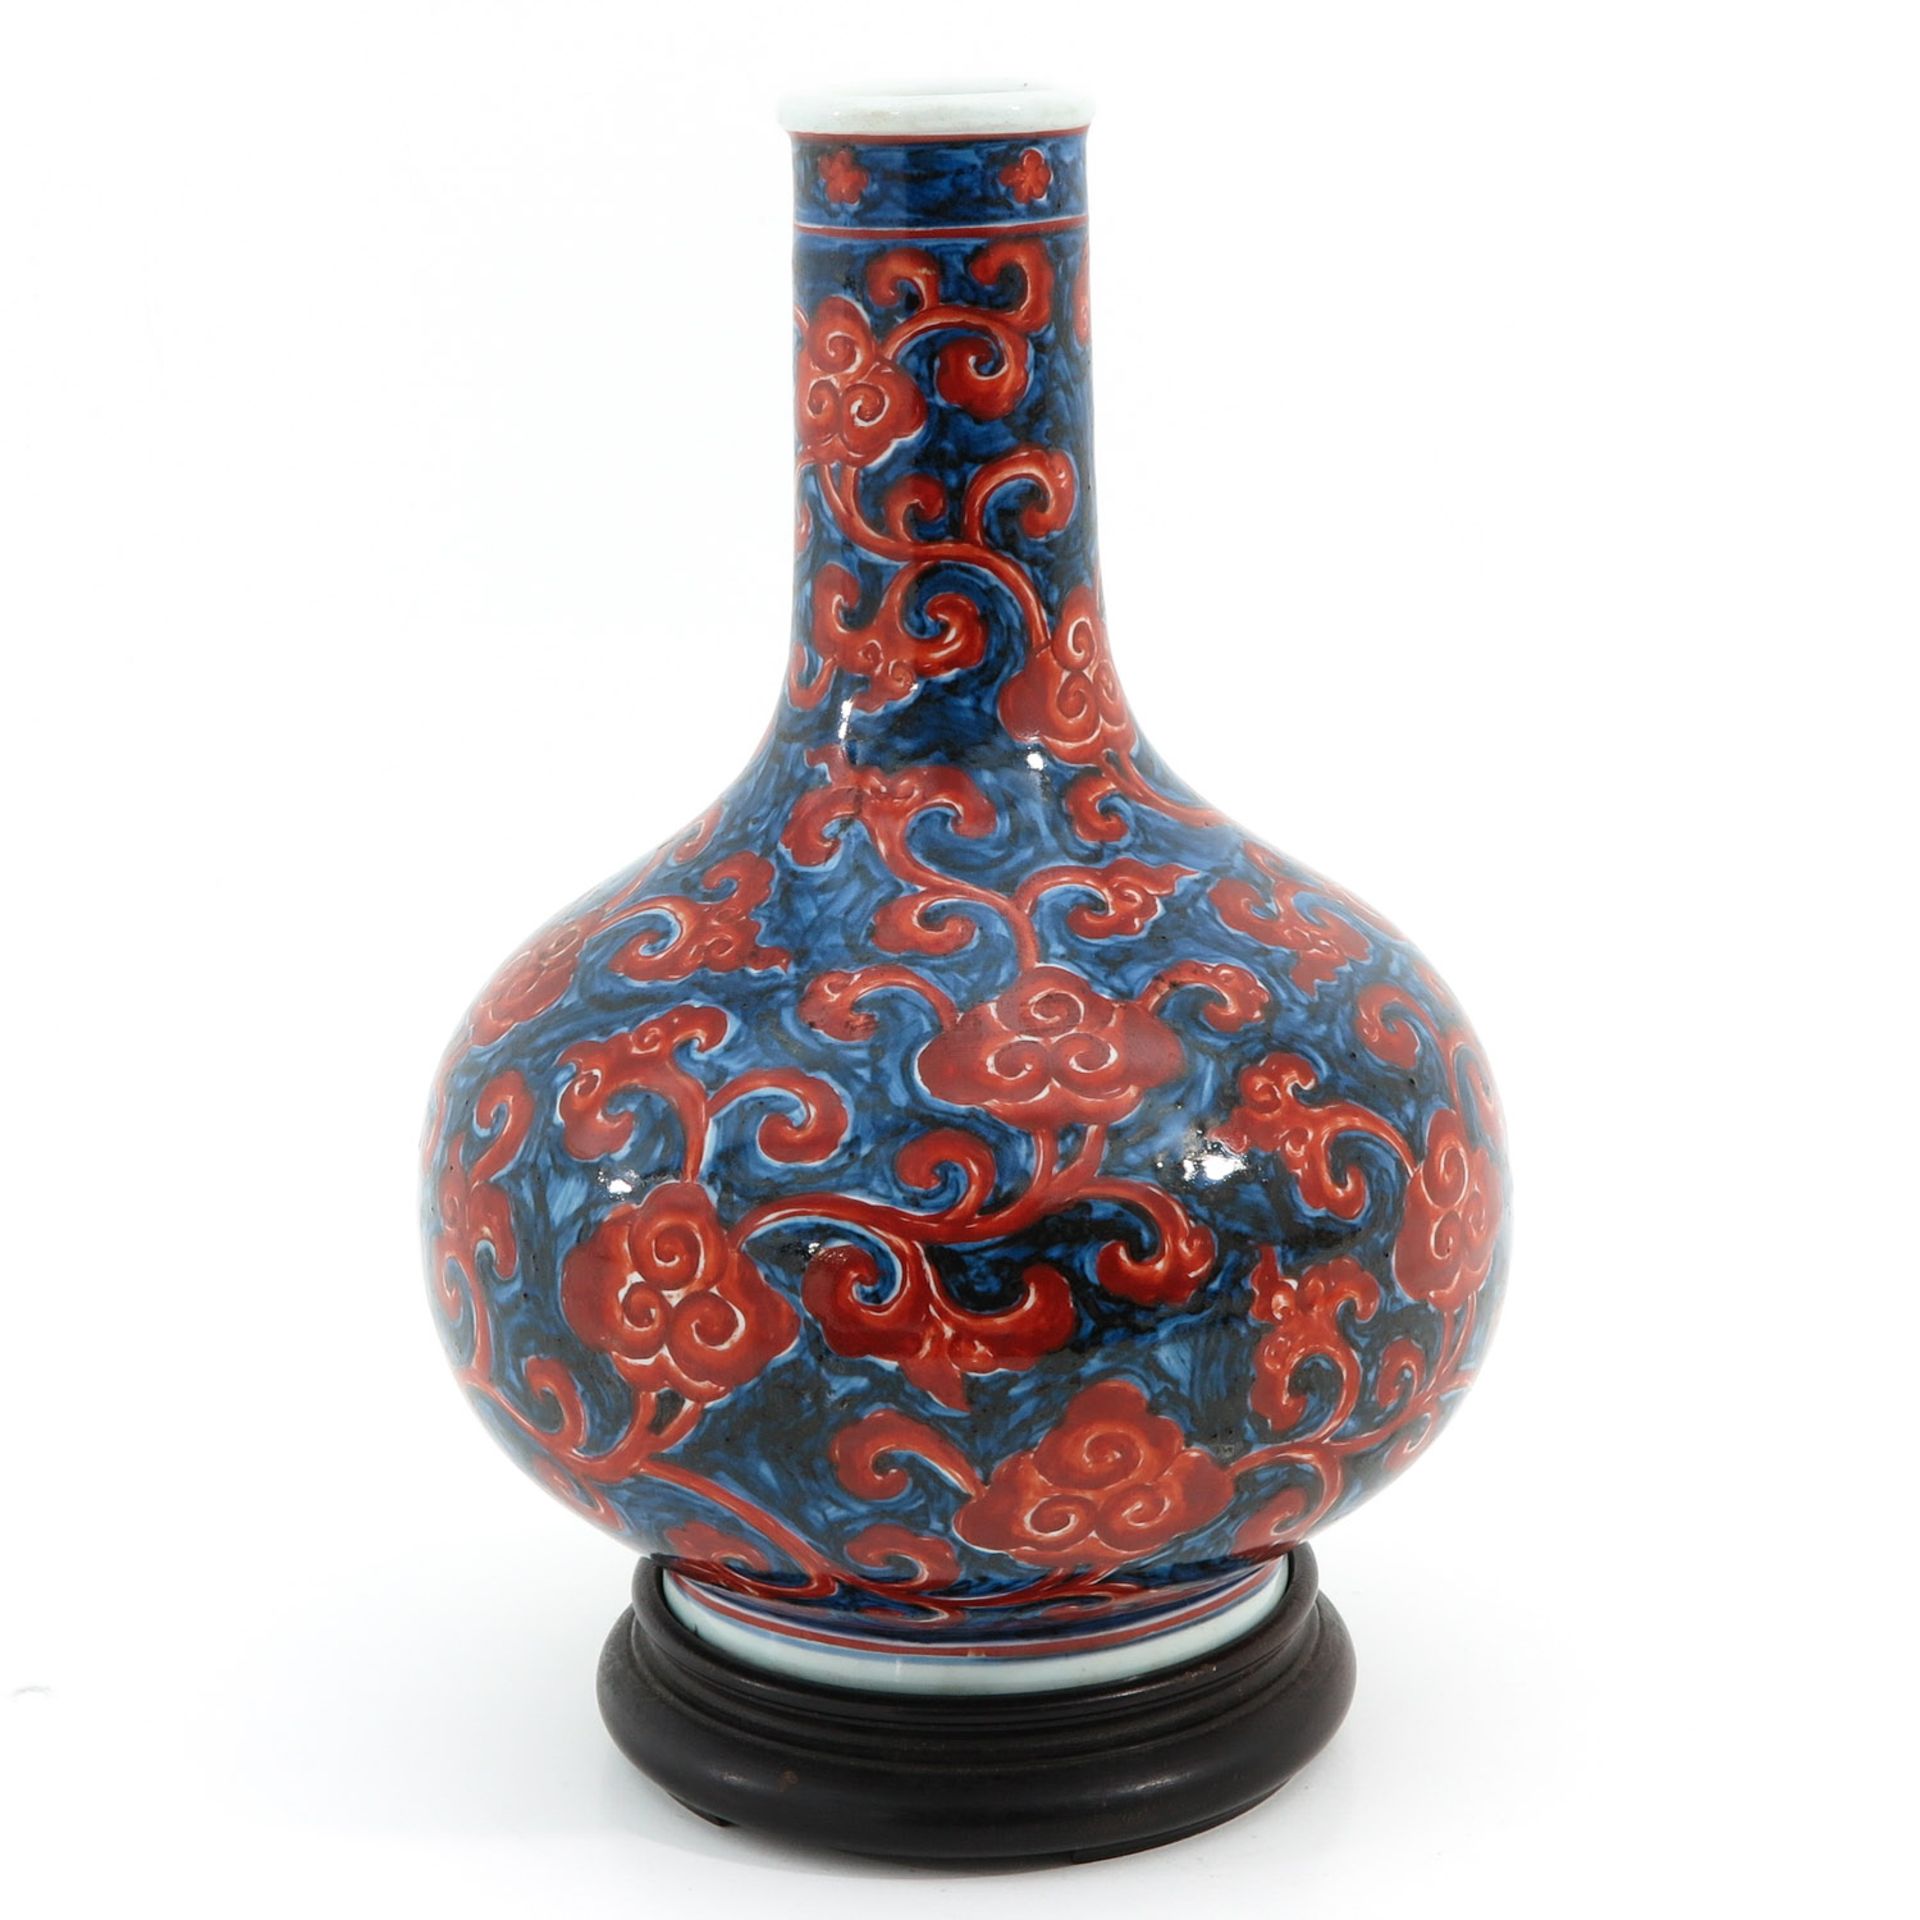 A Blue and Red Bottle Vase